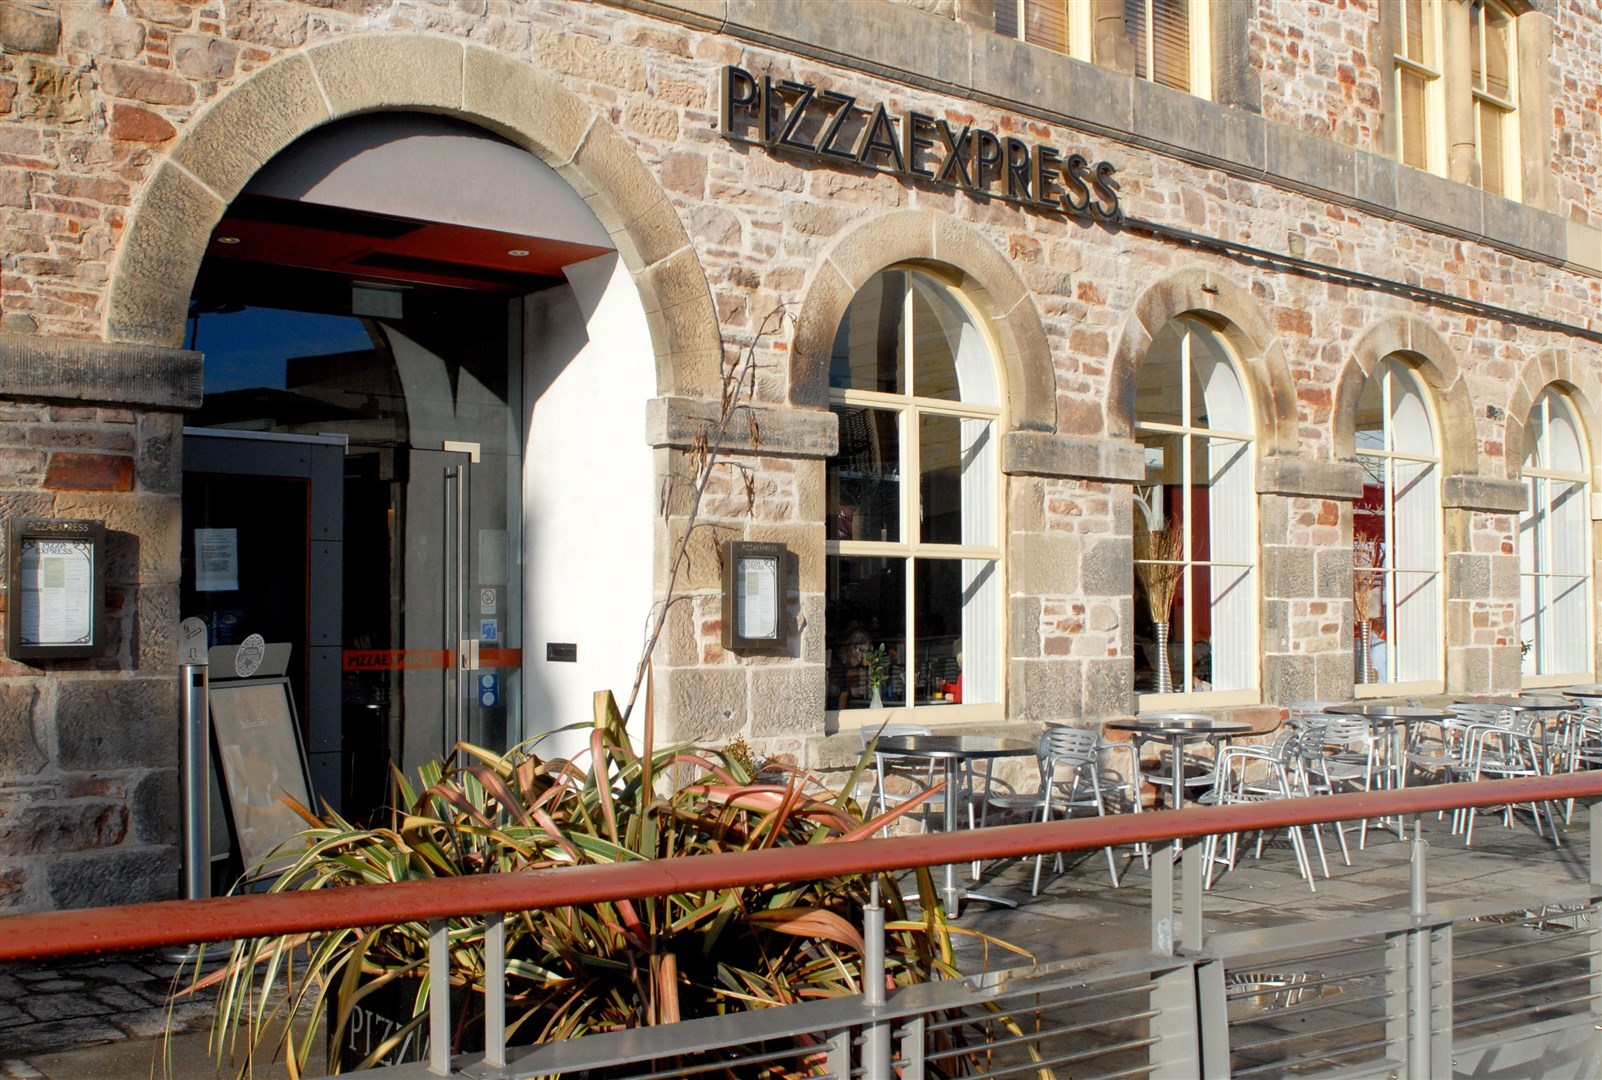 The future of the Pizza Express restaurant in Inverness appears secure for now.